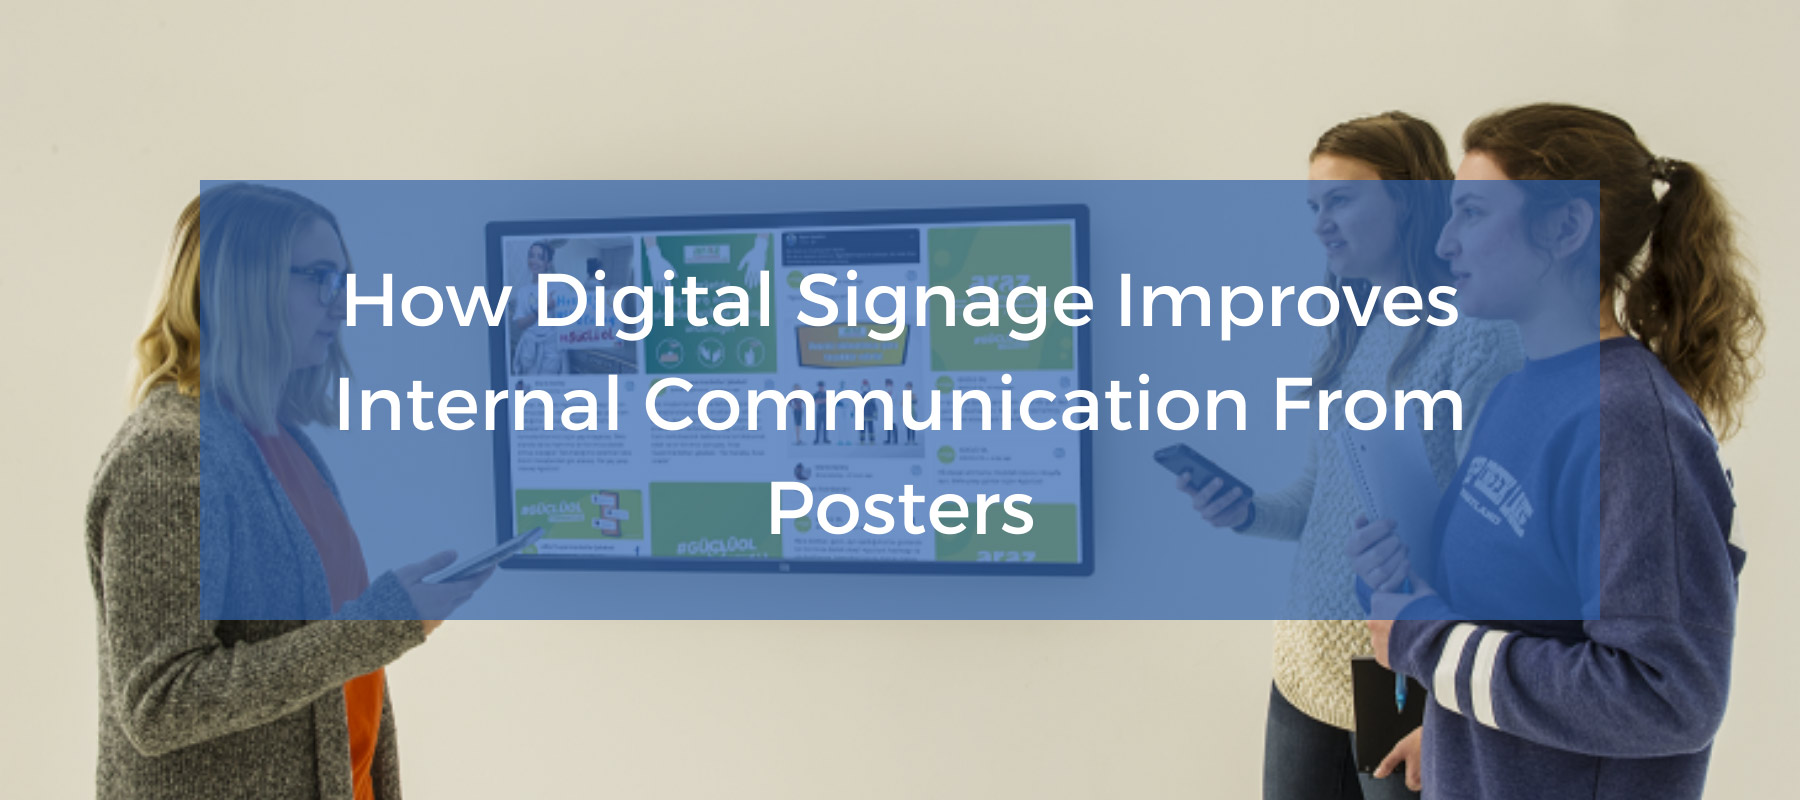 How Digital Signage Improves Internal Communication From Posters